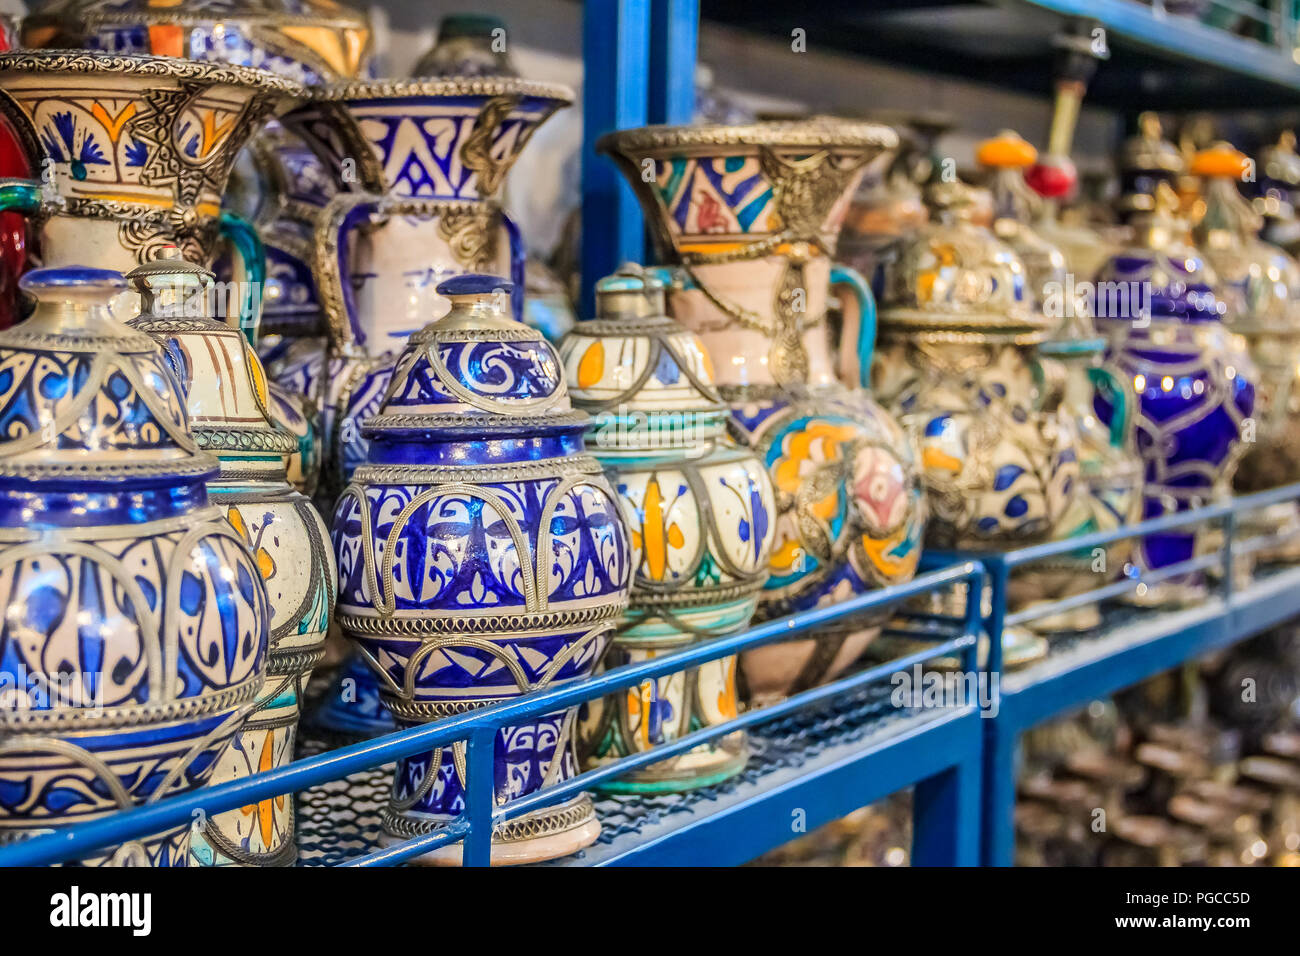 Fes, Morocco - May 11, 2013: Moroccan ceramics handicrafts on display in a pottery shop Stock Photo